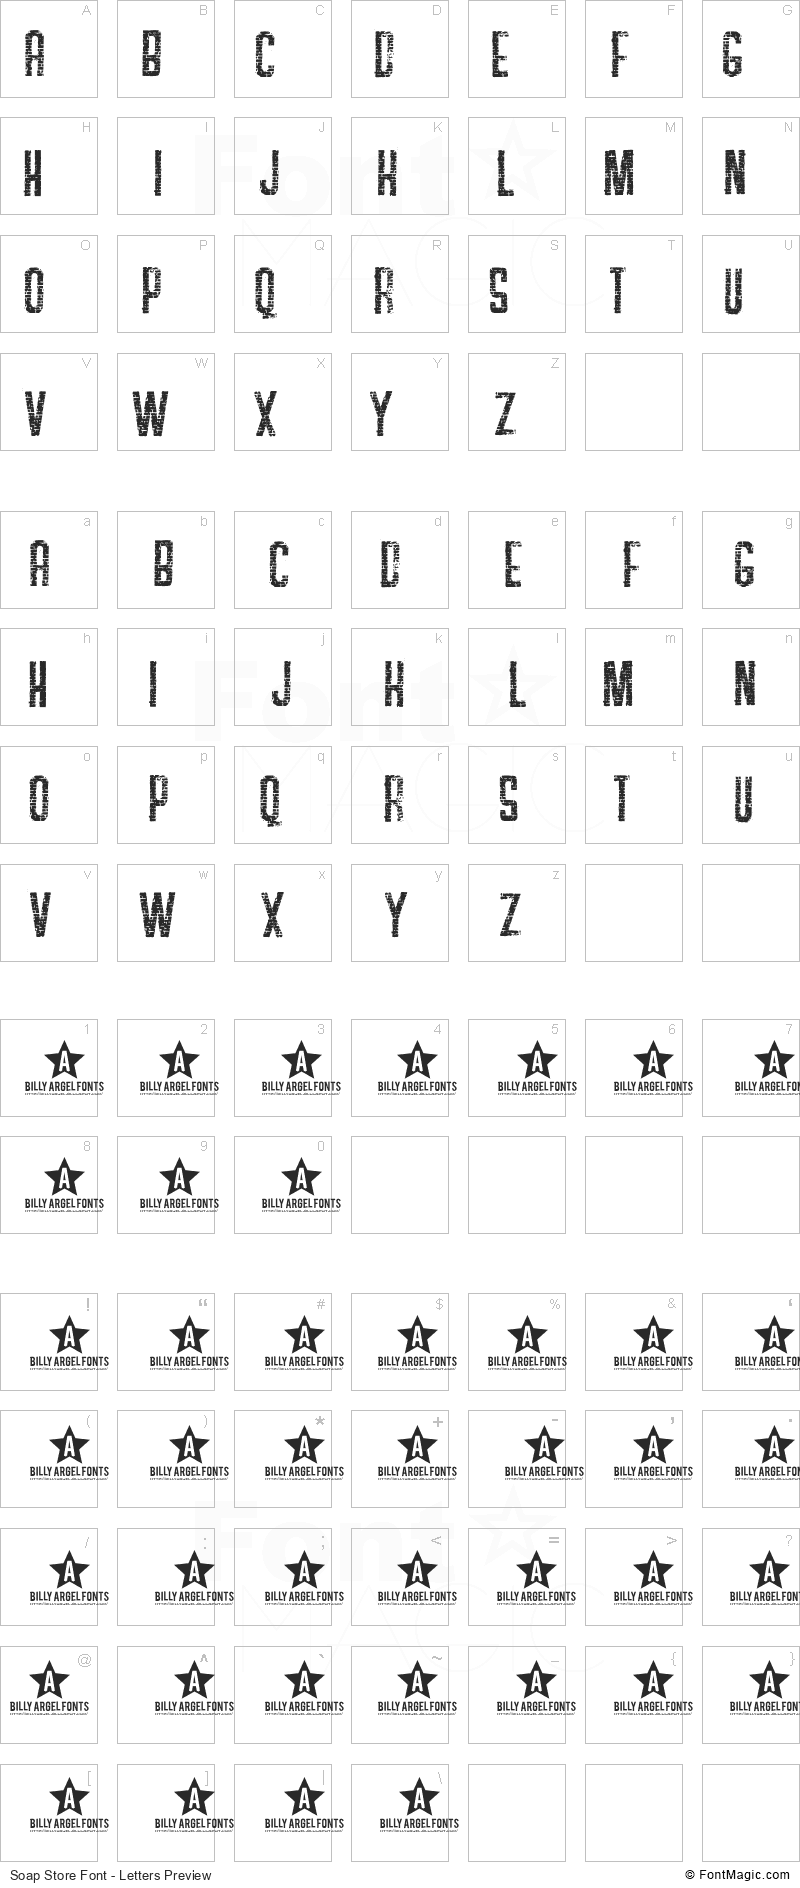 Soap Store Font - All Latters Preview Chart